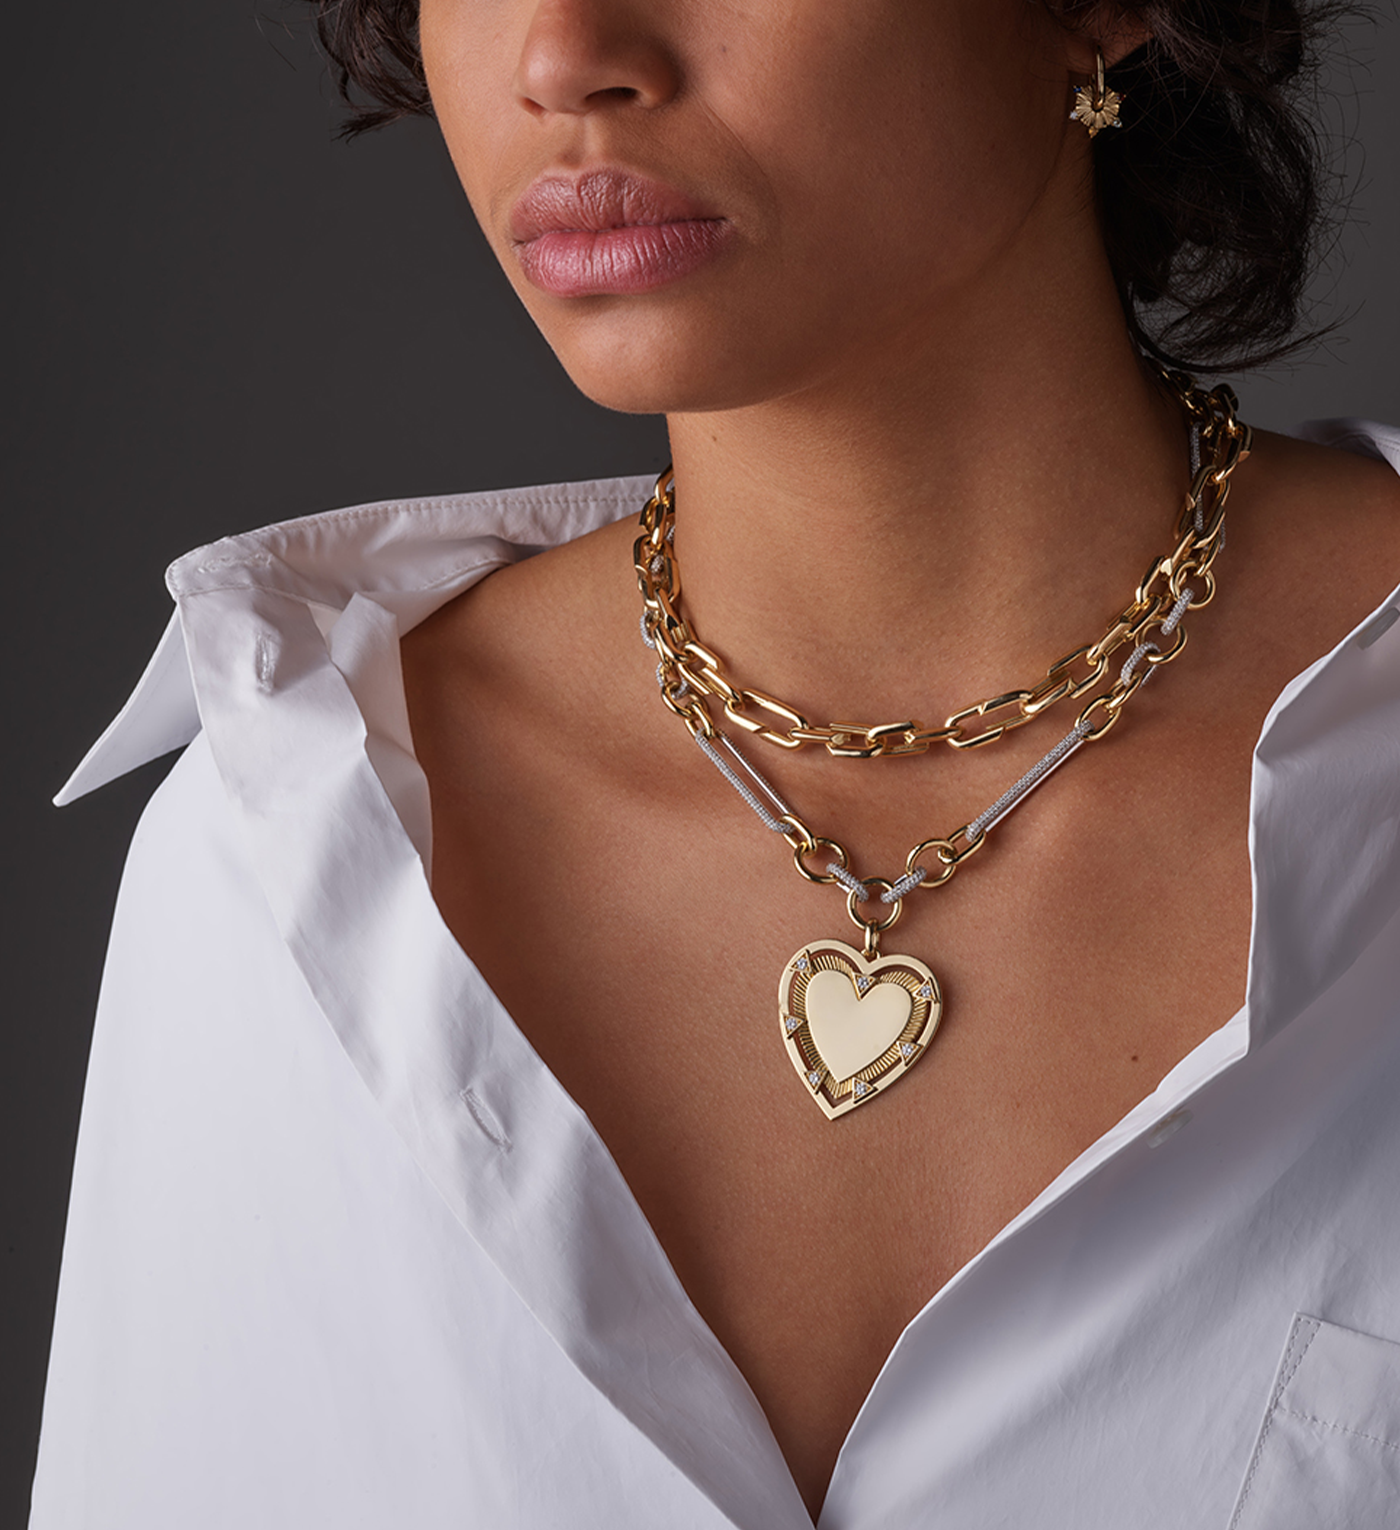 Medium Strong Hearts Love Link Chain Necklace